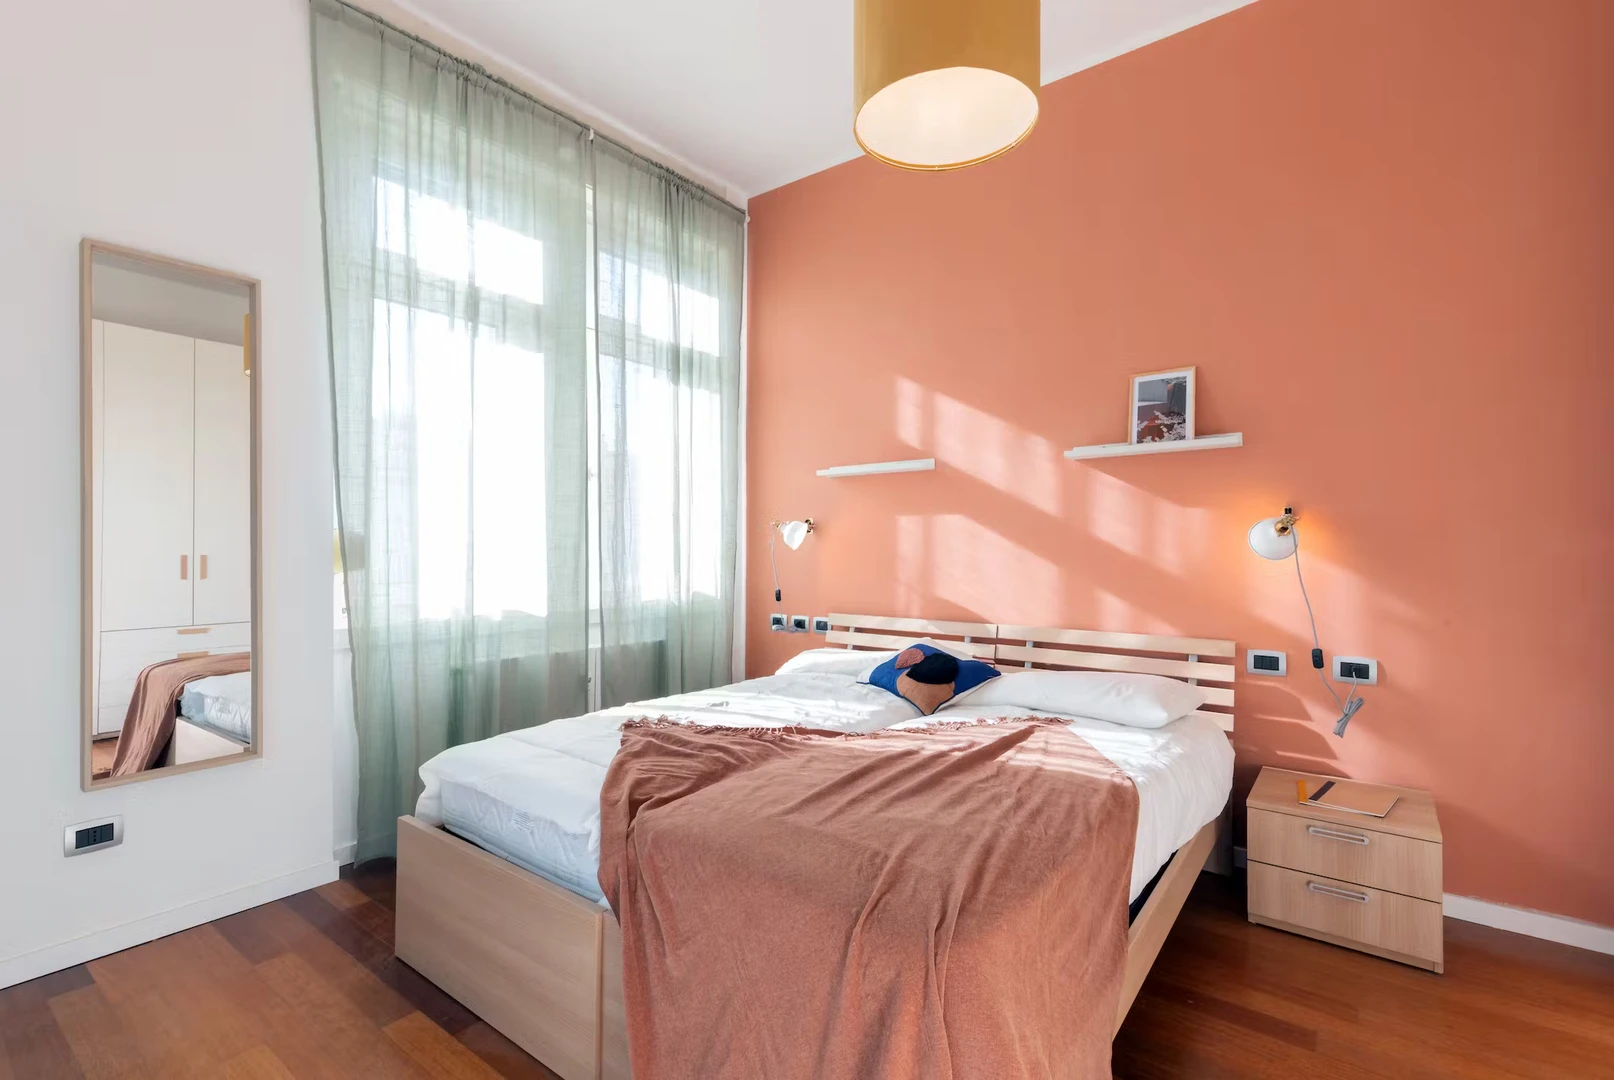 Accommodation in the centre of Trieste